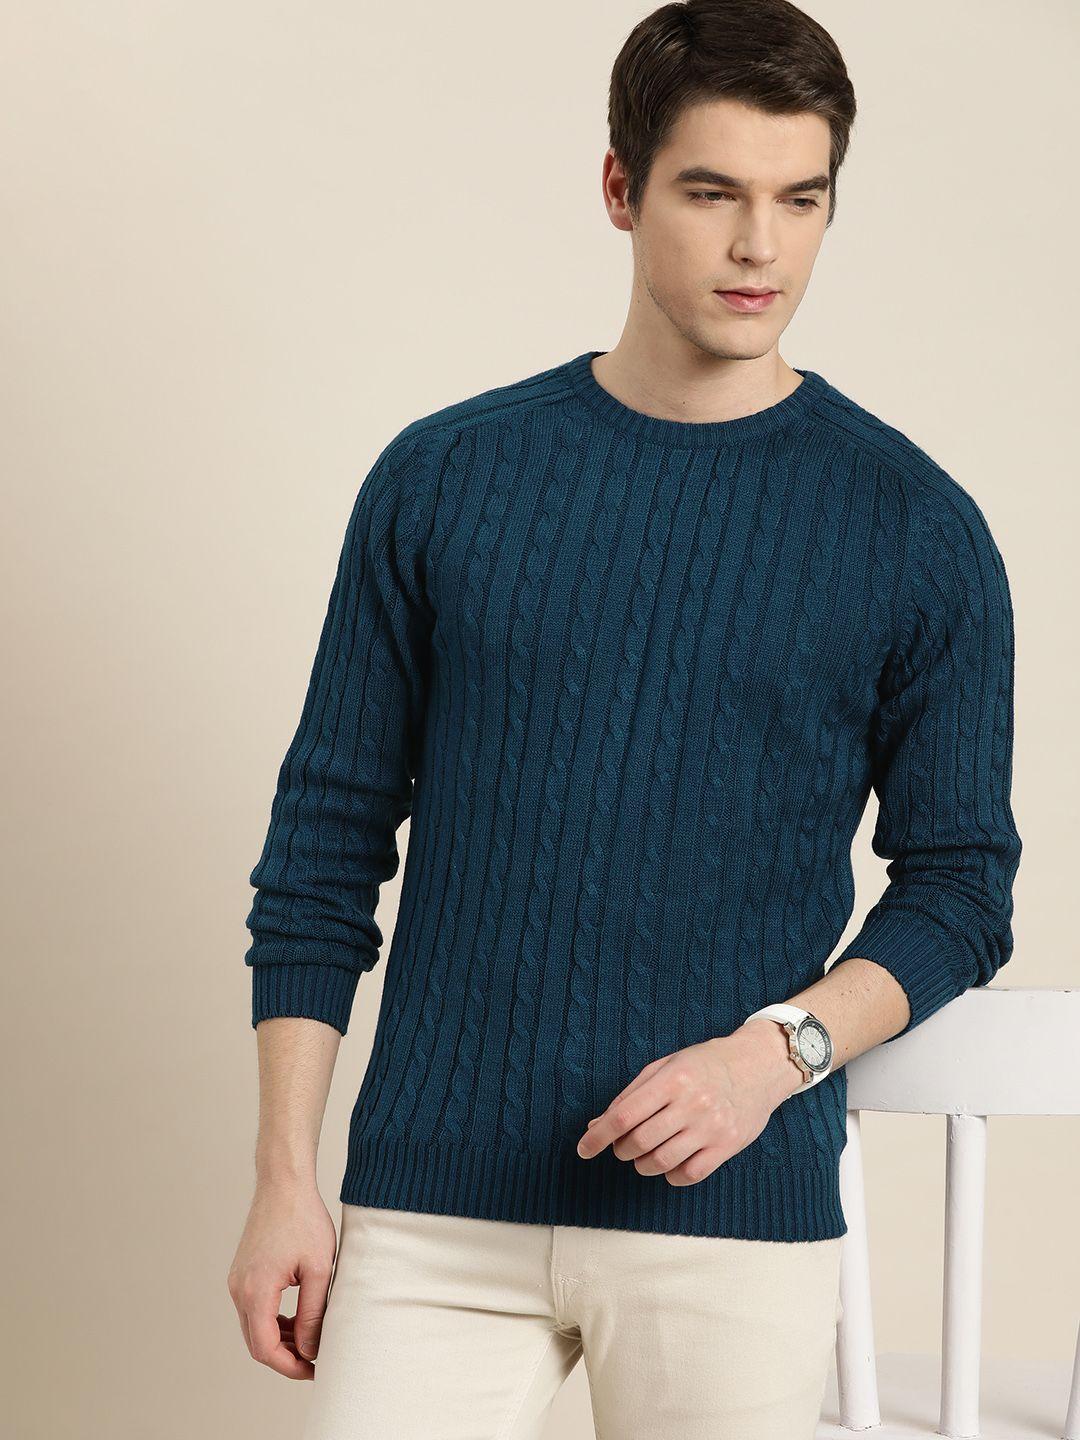 invictus men teal green acrylic cable knit pullover